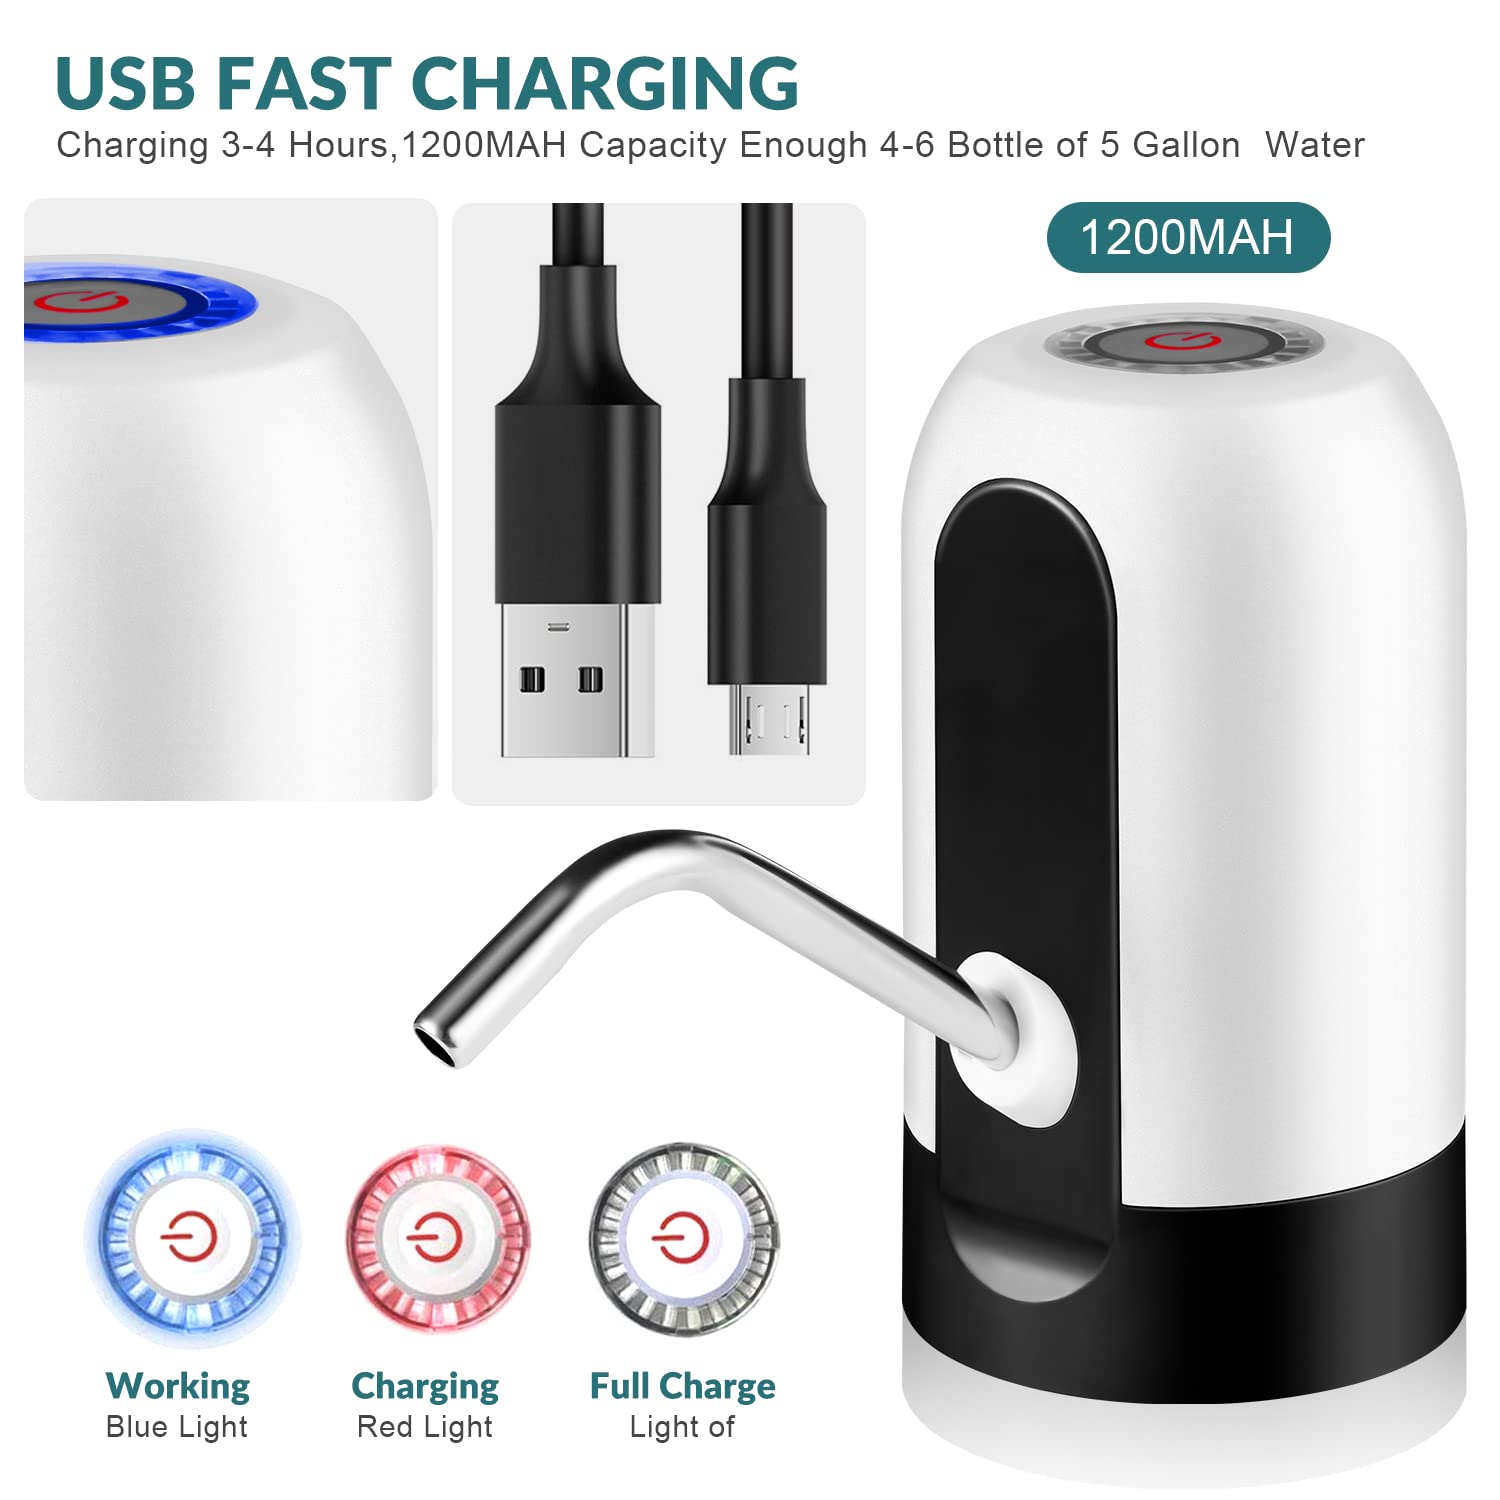 5 Gallon Water Dispenser, LONEASY Portable USB Charging Electric Drinking Water Pump for 5 Gallon Bottle, Automatic Water Jug Dispenser Water Bottle Pump for Home Kitchen Office Camping